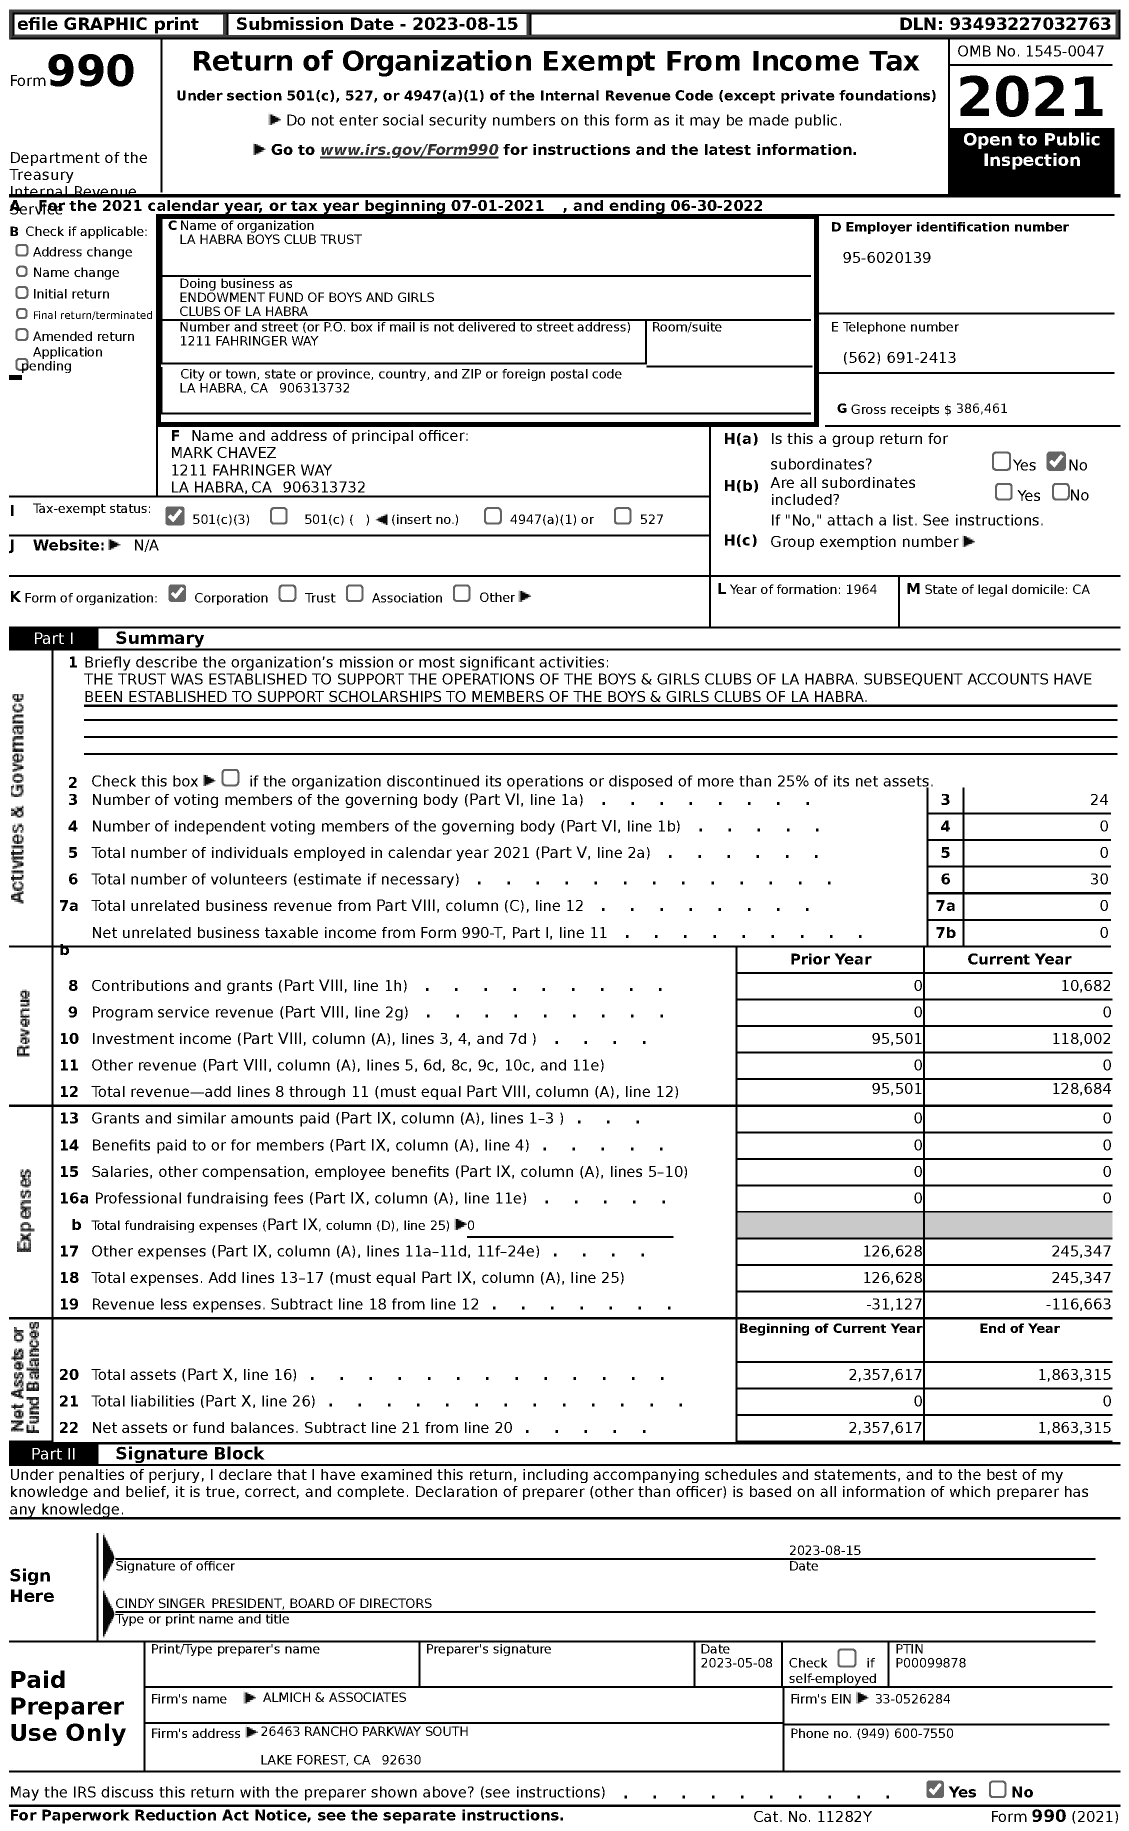 Image of first page of 2021 Form 990 for Endowment Fund of Boys and Girls Clubs of La Habra